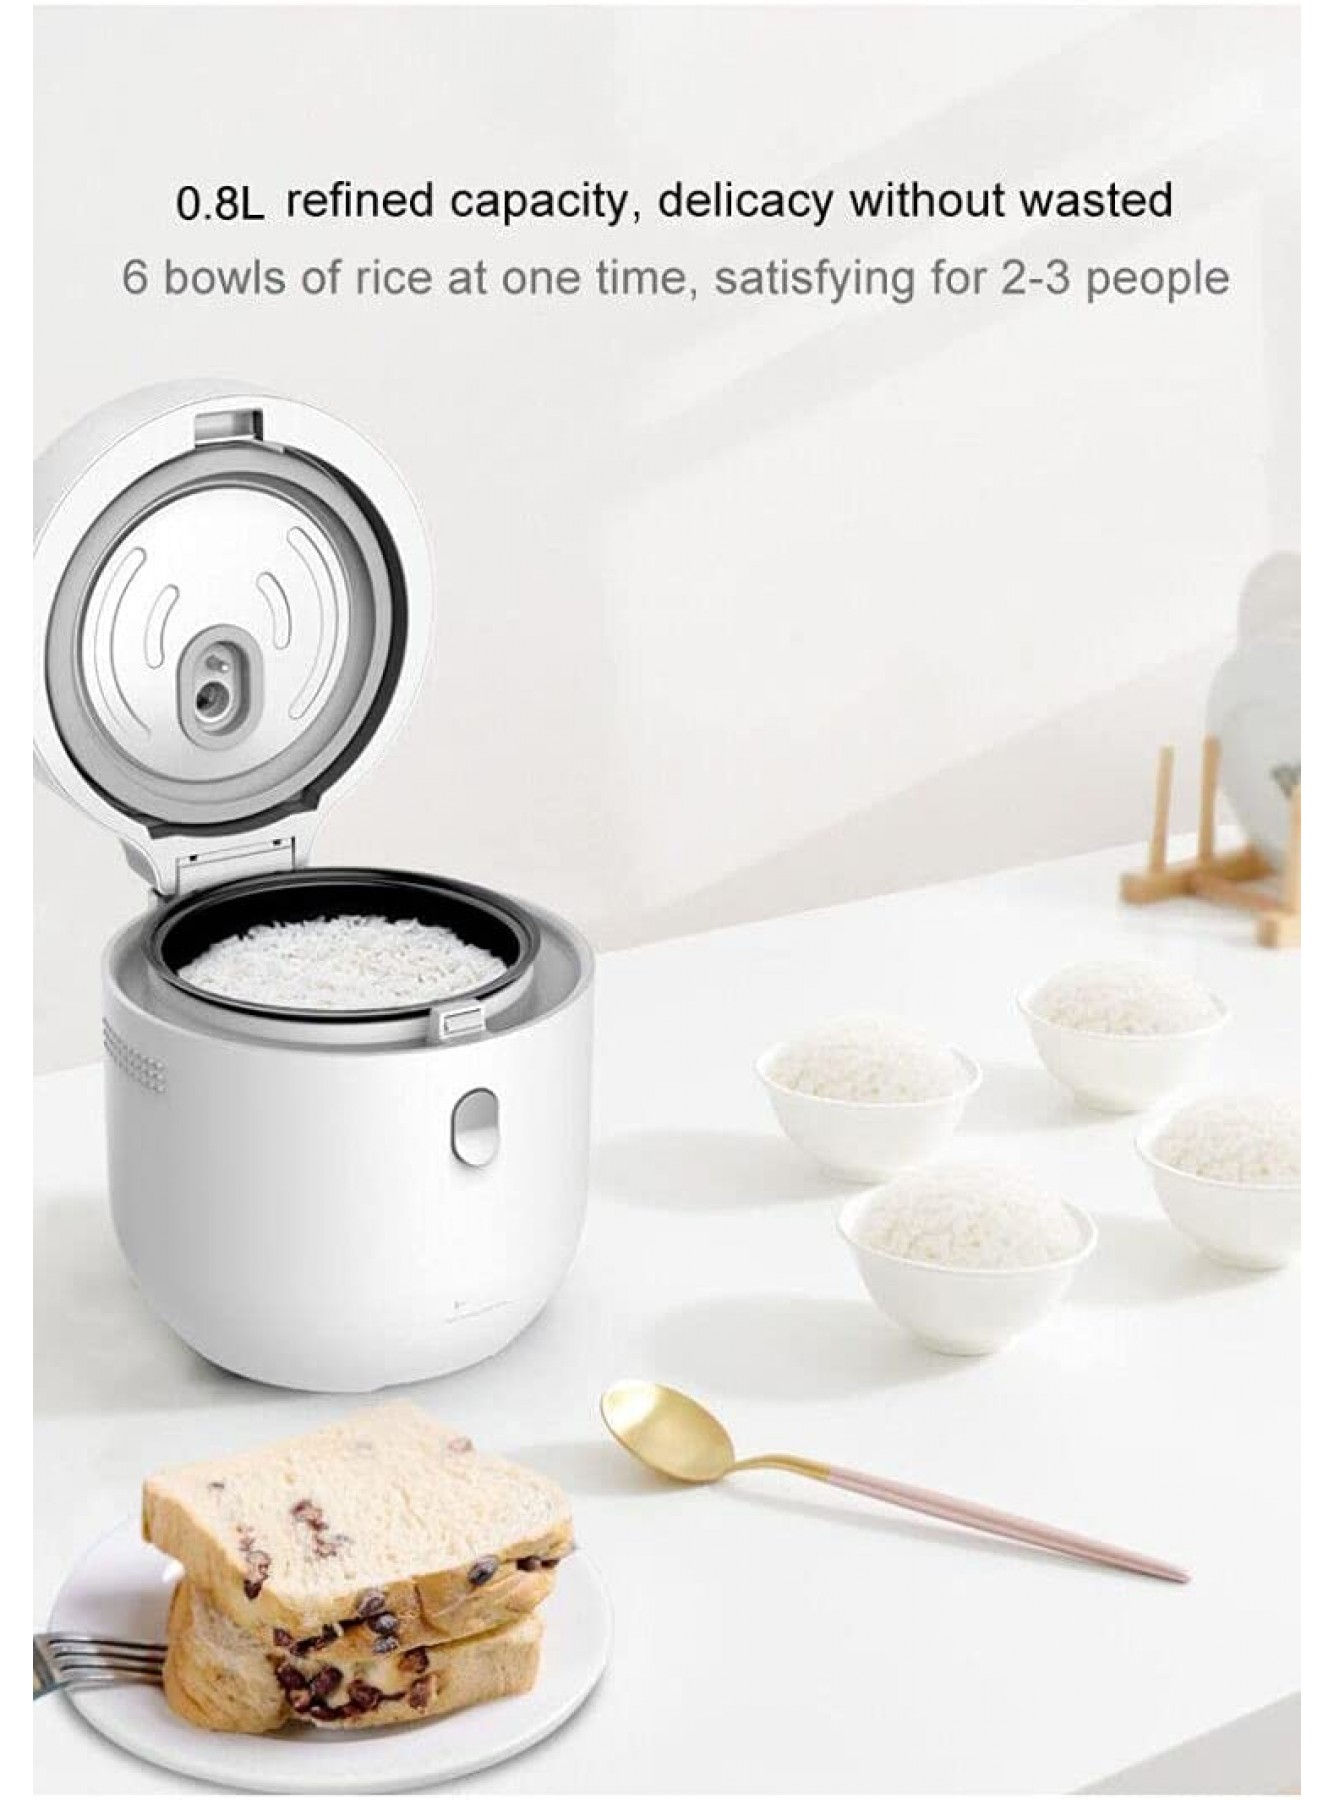 GUANGZHIAN Smart Small Portable Travel Electric Cordless Low Sugar Mini Rice Cooker Multi Function Electric Cooker 0.8L white B094J4MLGD